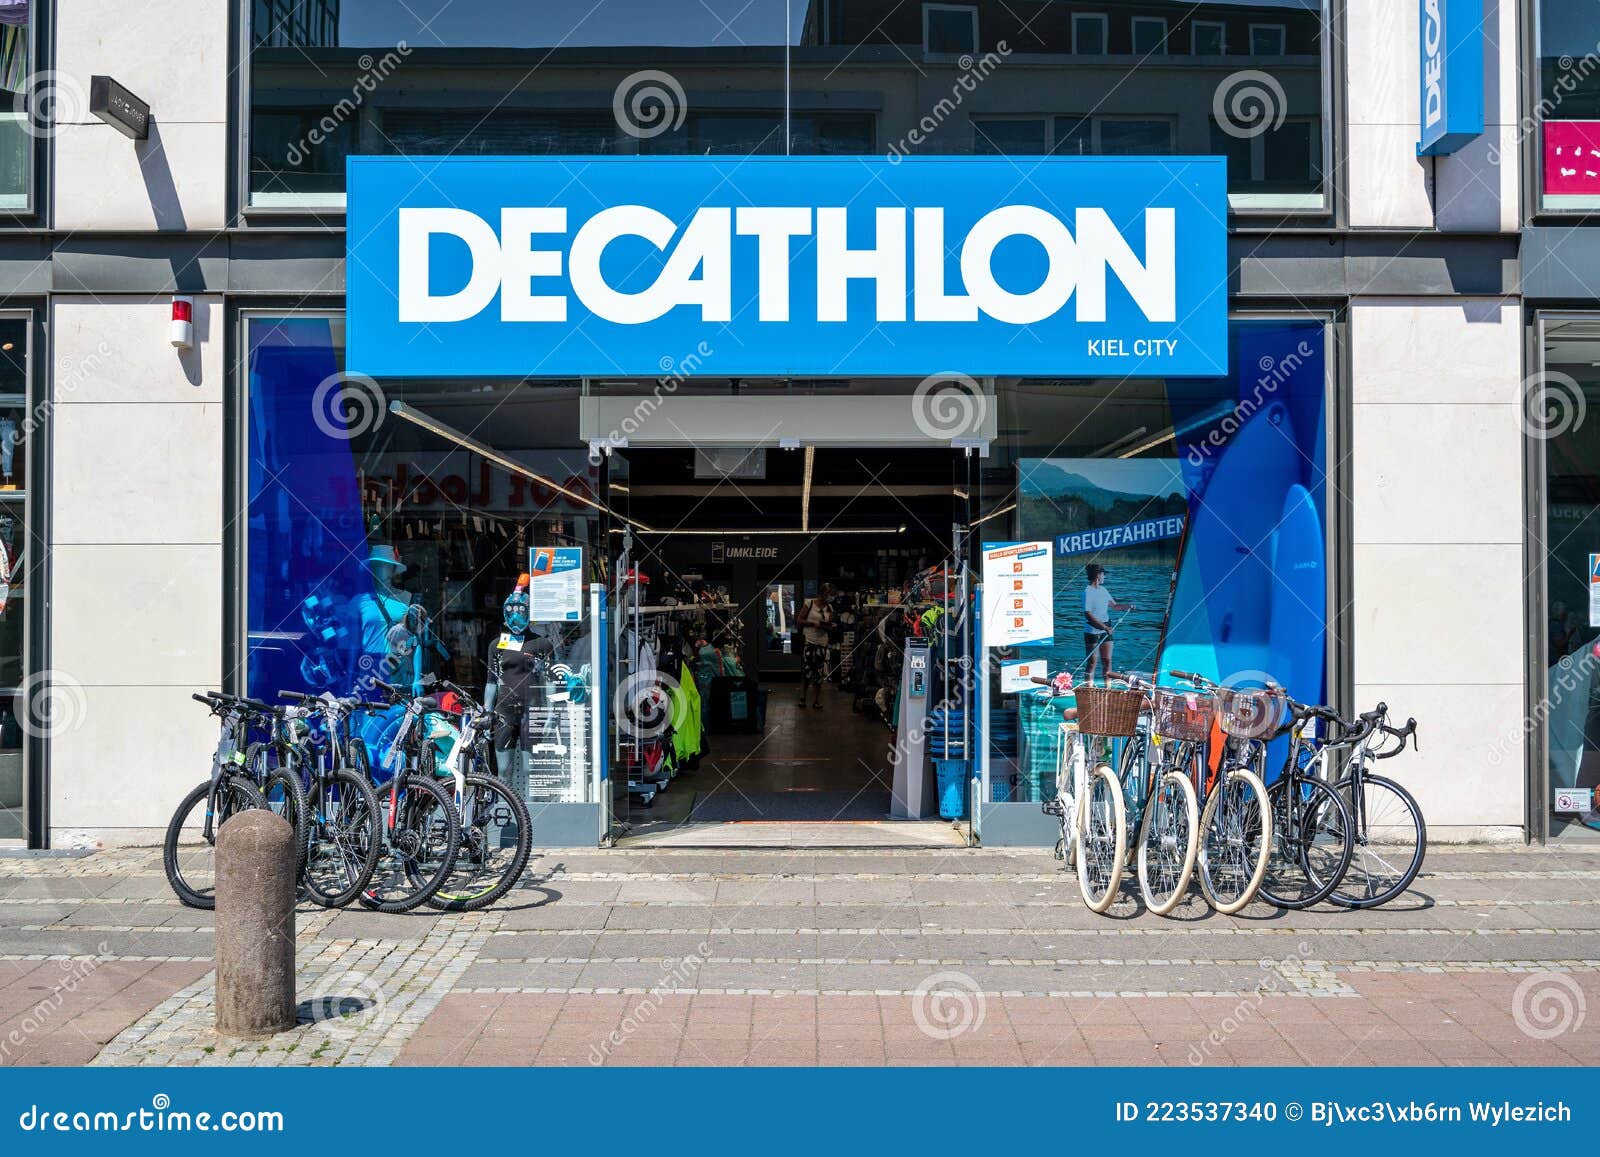 354 decathlon sports store photos free royalty free stock photos from dreamstime